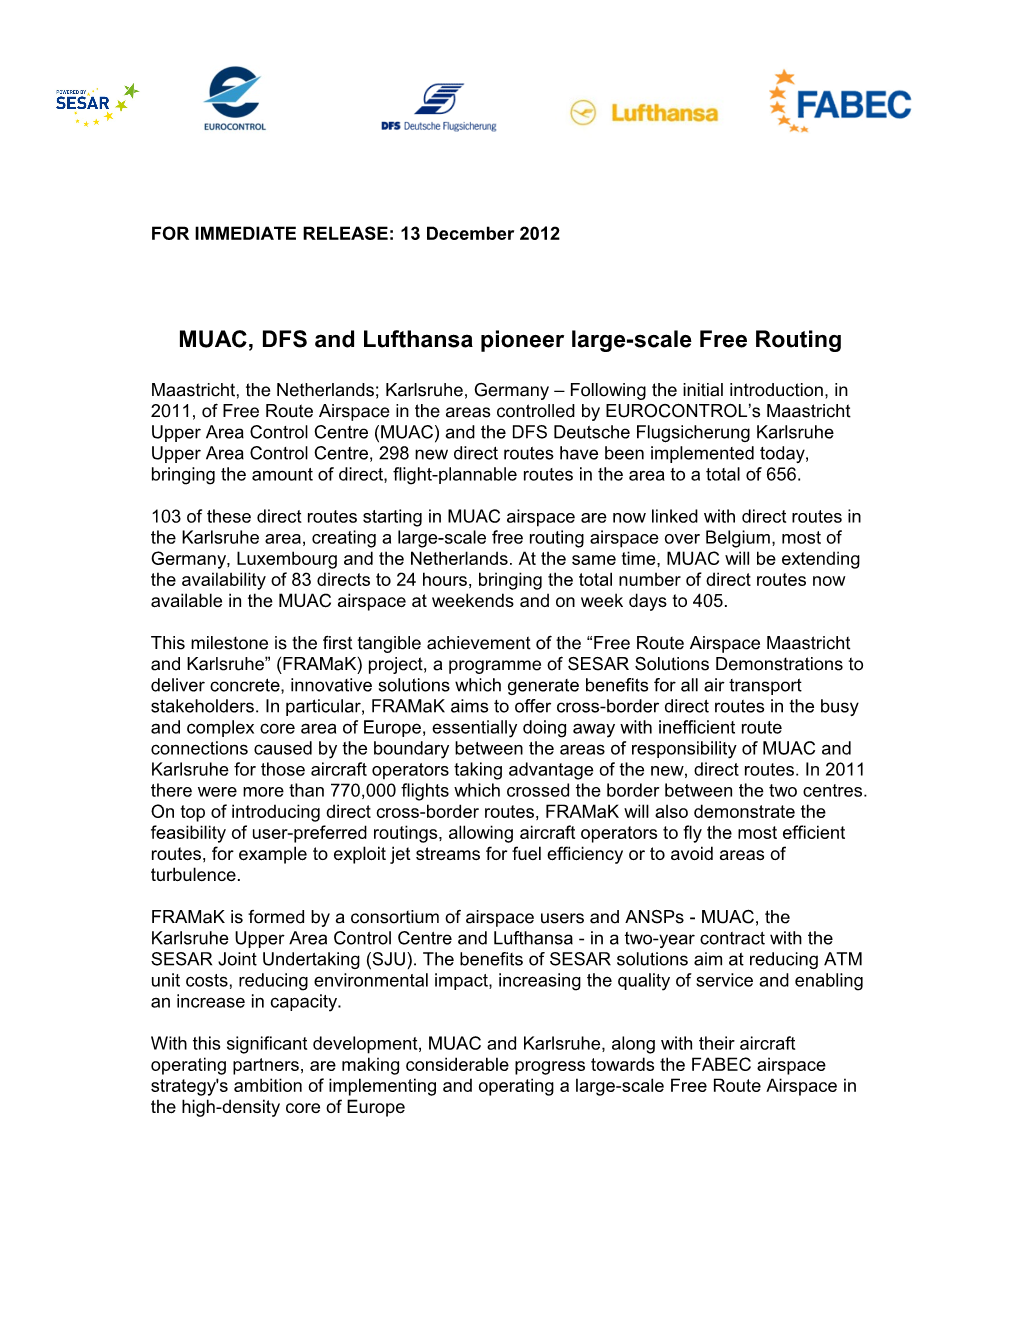 MUAC, DFS and Lufthansa Pioneer Large-Scale Free Routing